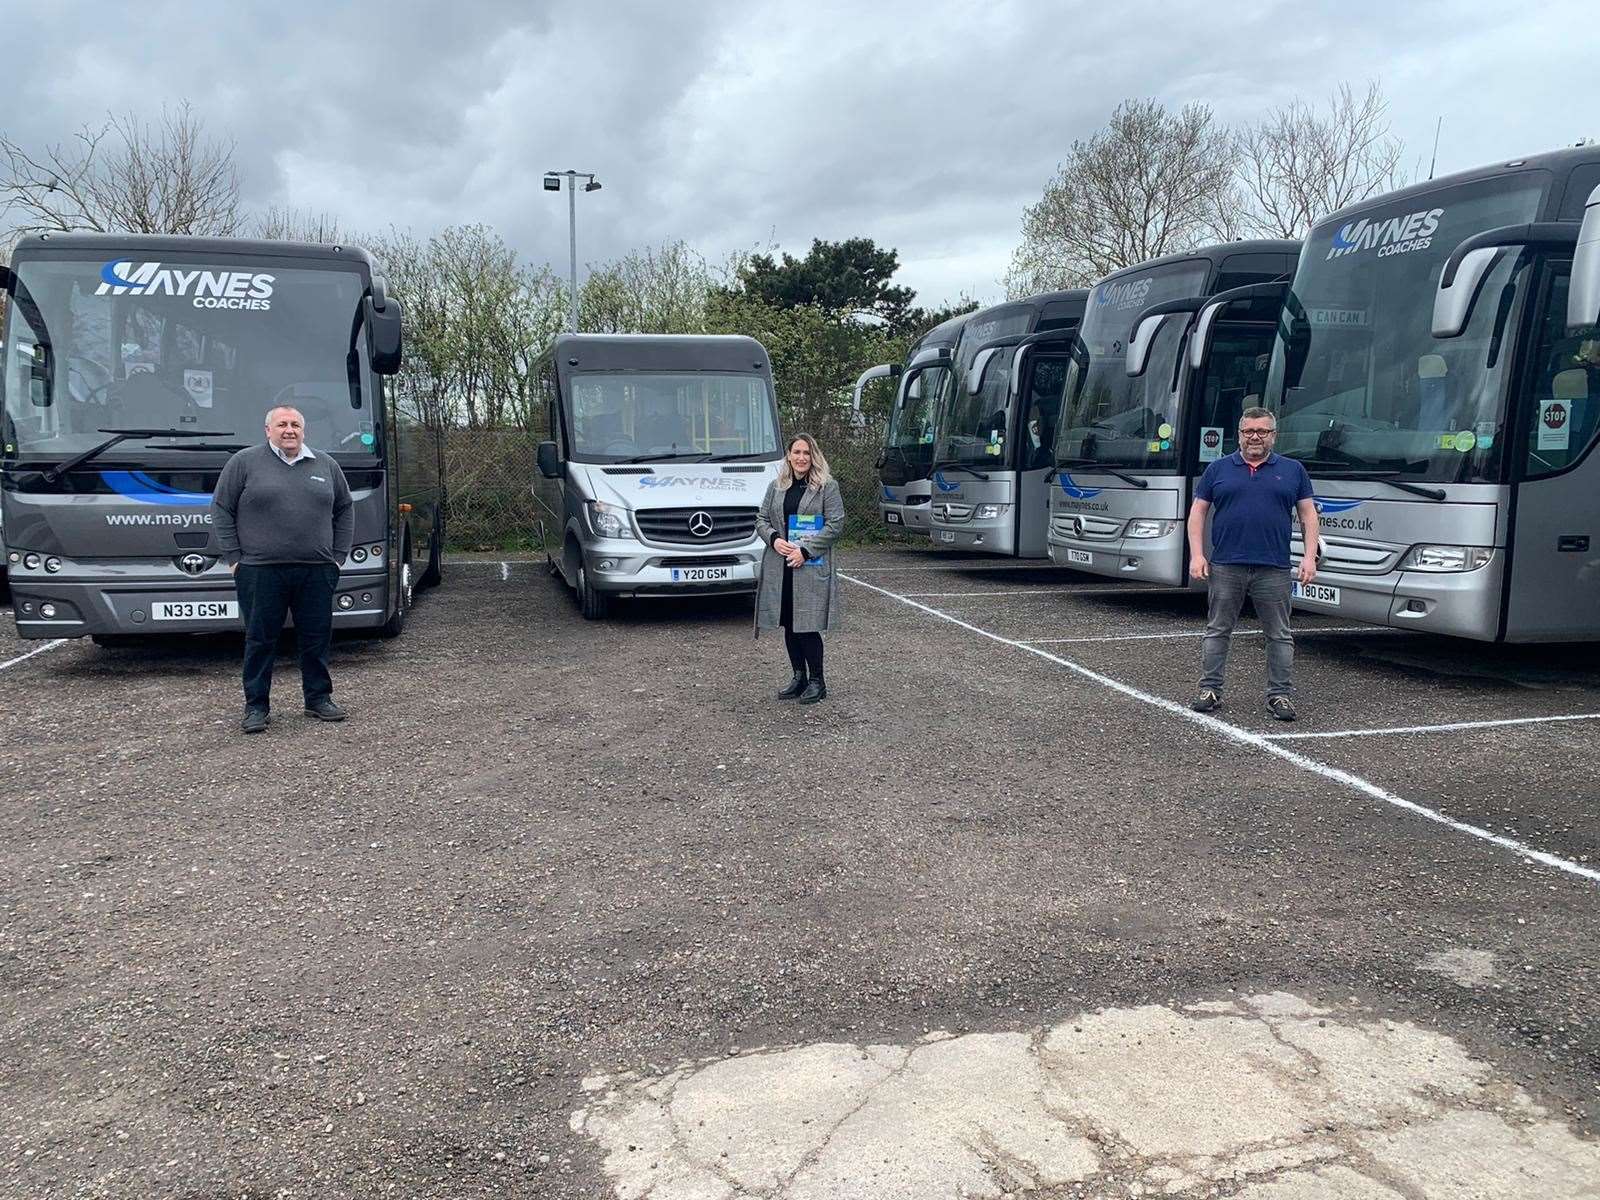 Karen Adam has a socially-distanced chat with Mayne's Coaches directors Kevin (left) and David Mayne during her visit to the firm's March Road depot. Picture: SNP